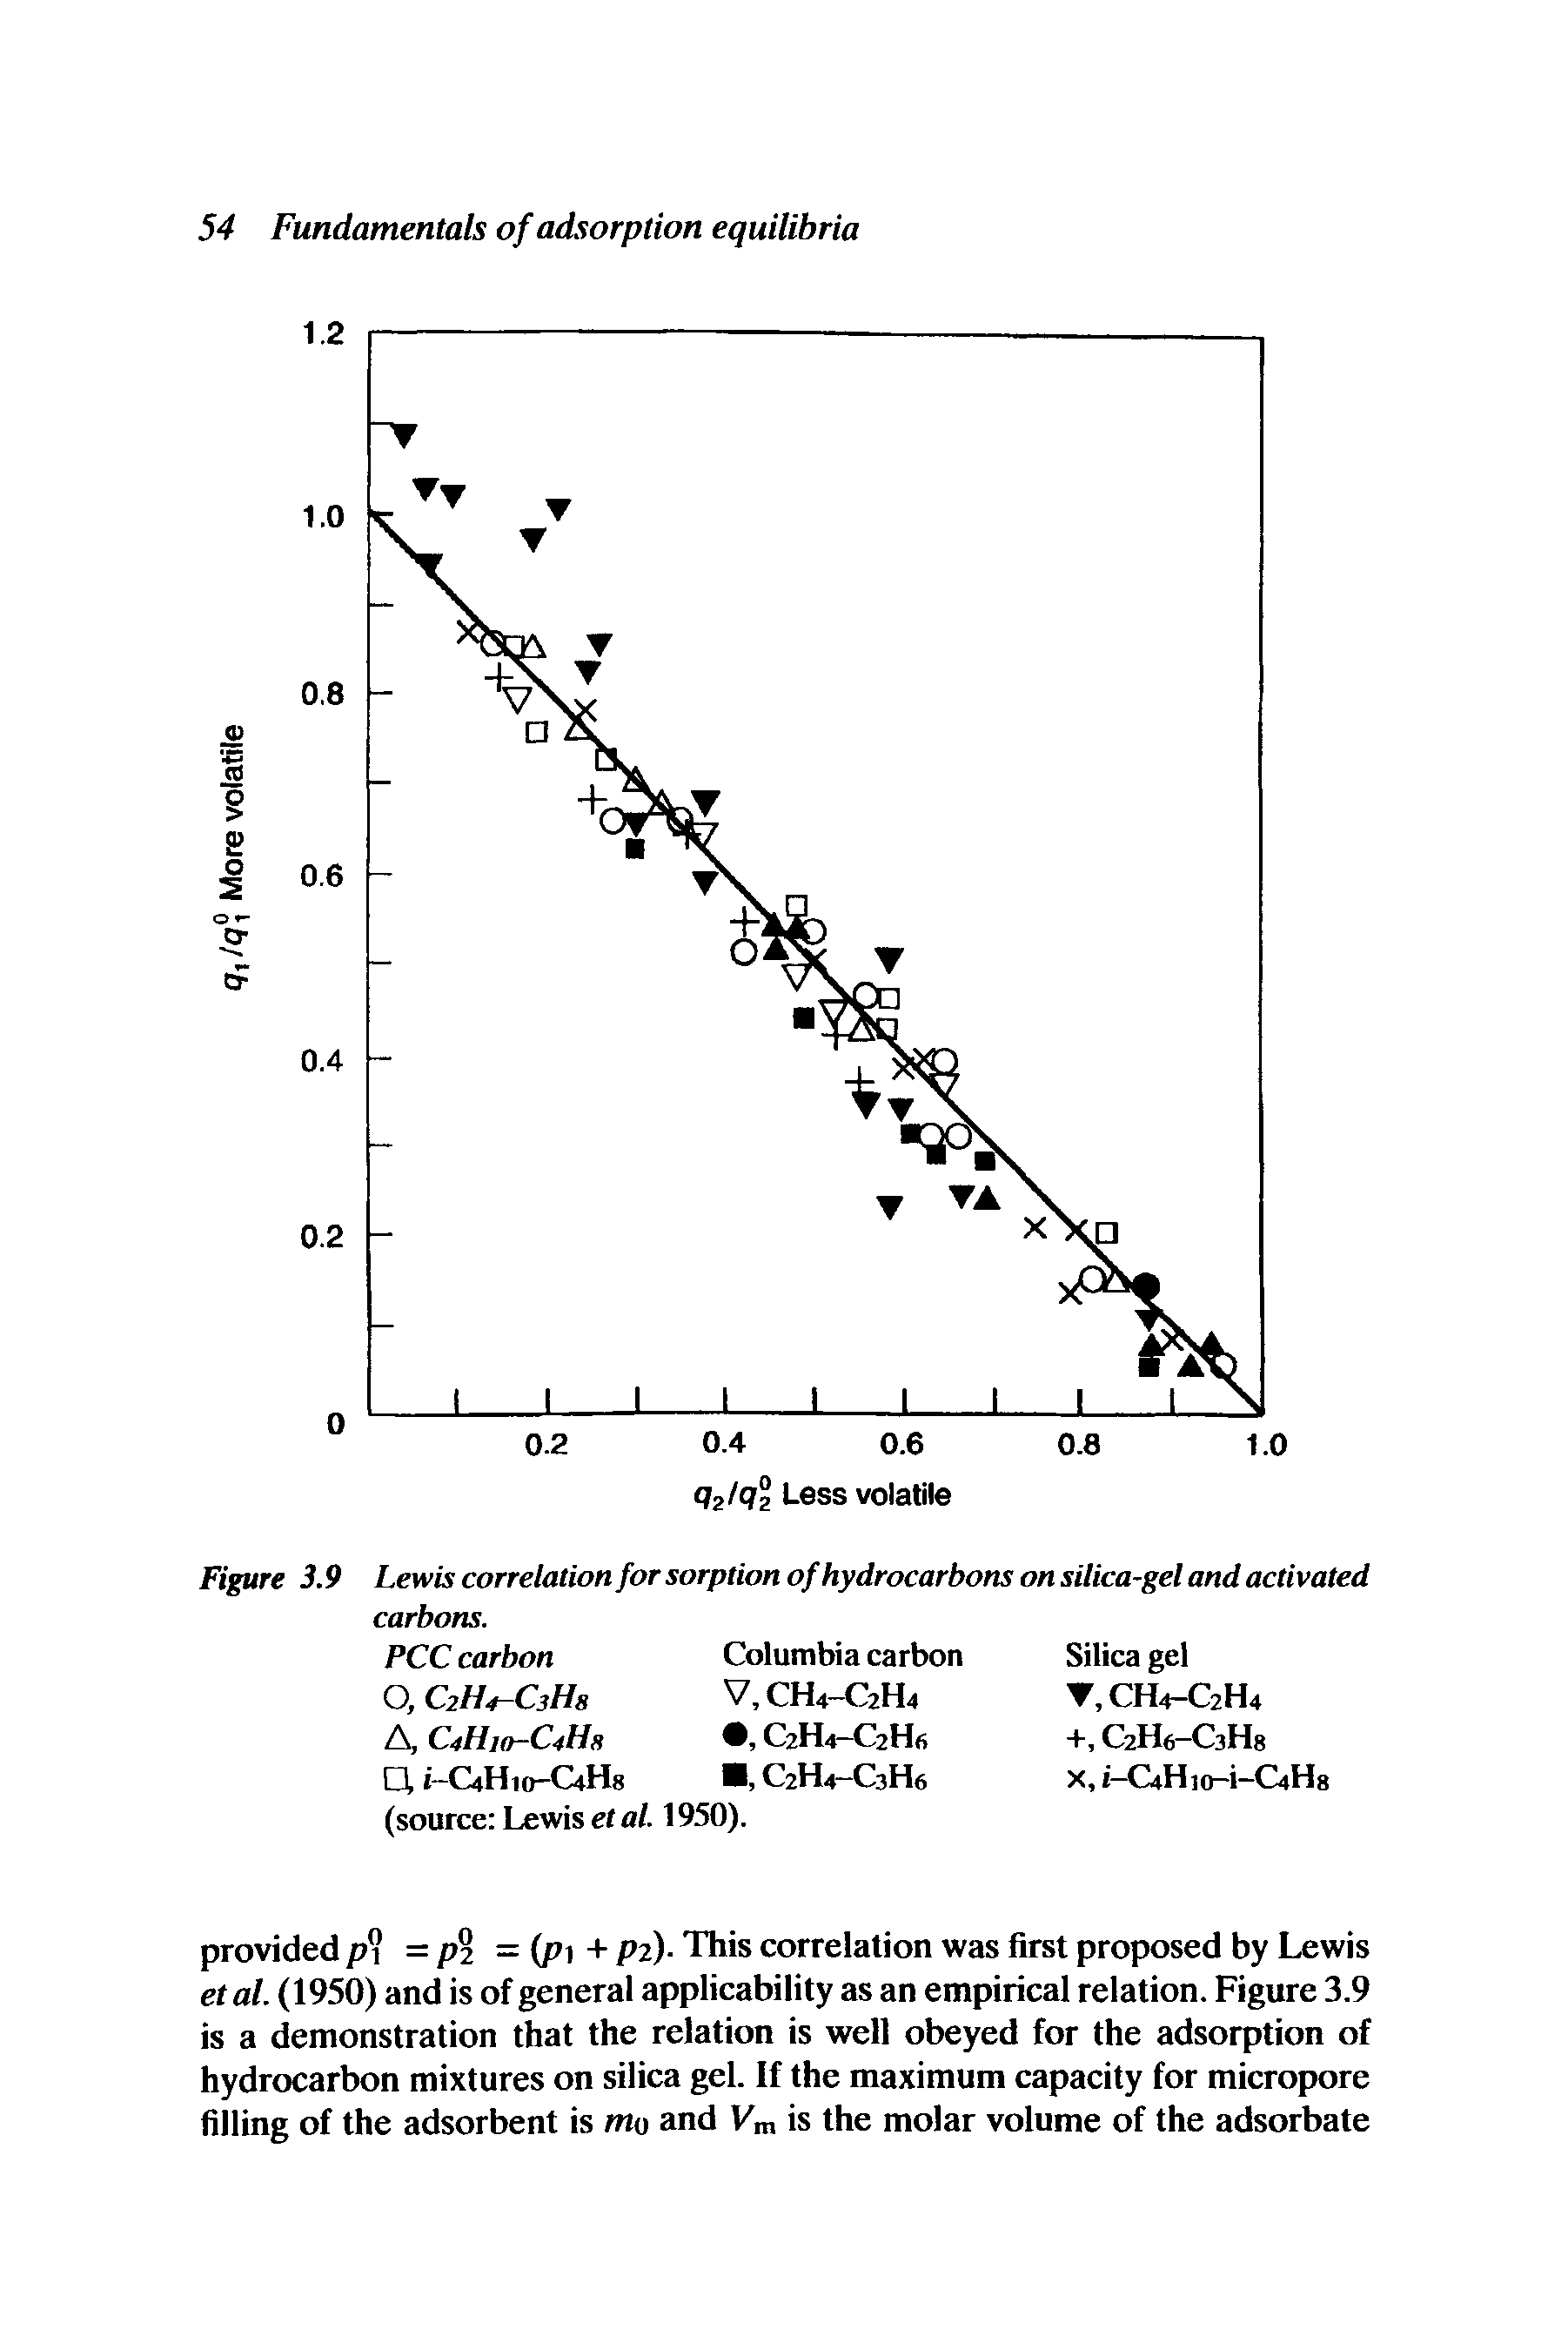 Figure 3.9 Lewis correlation for sorption of hydrocarbons on silica-gel and activated carbons.